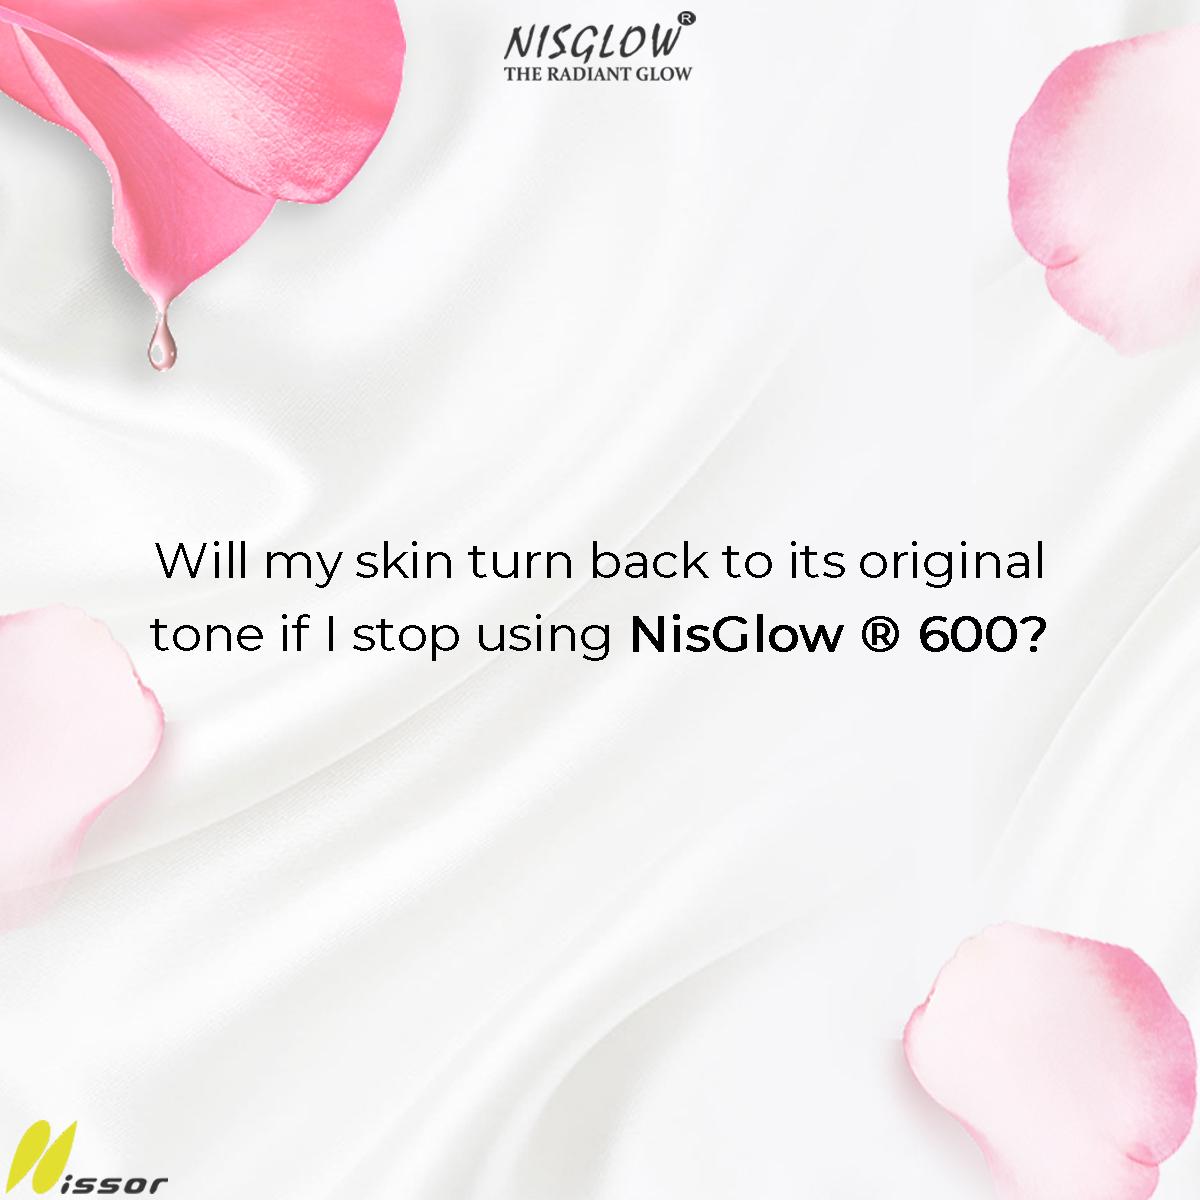 Will my skin revert back if I stop using the product?
No, your skin will not revert back if you stop using the product. However, for continued radiance and optimal skin health, we would recommend continued usage of #NisGlow.

#FAQs #Lglutathione #vitaminc #fairness #skinfairness